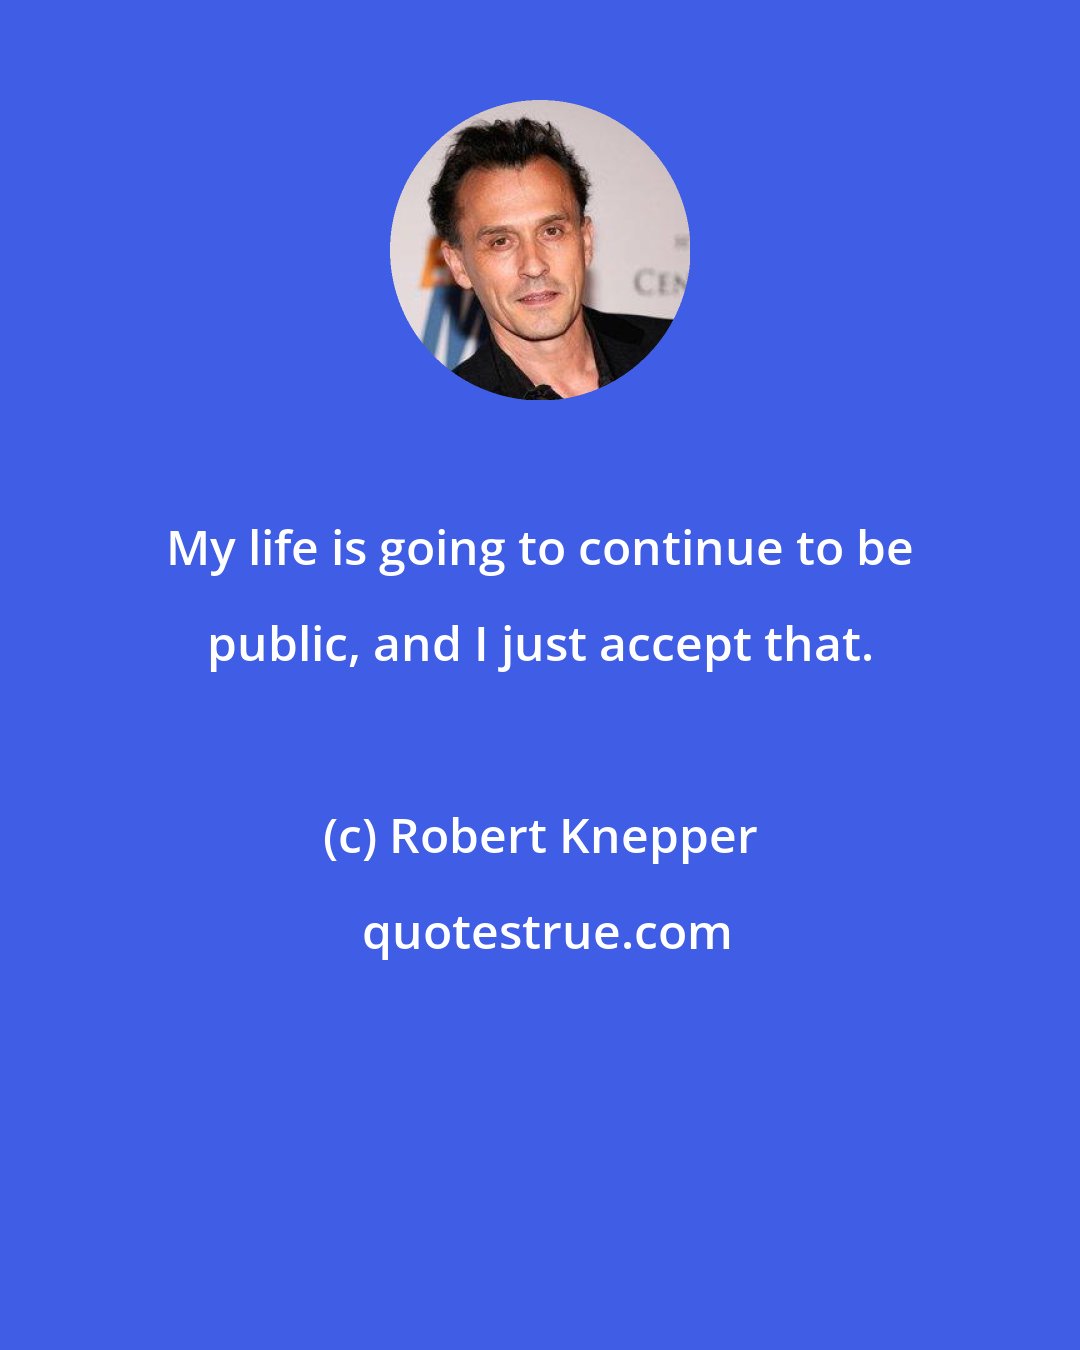 Robert Knepper: My life is going to continue to be public, and I just accept that.